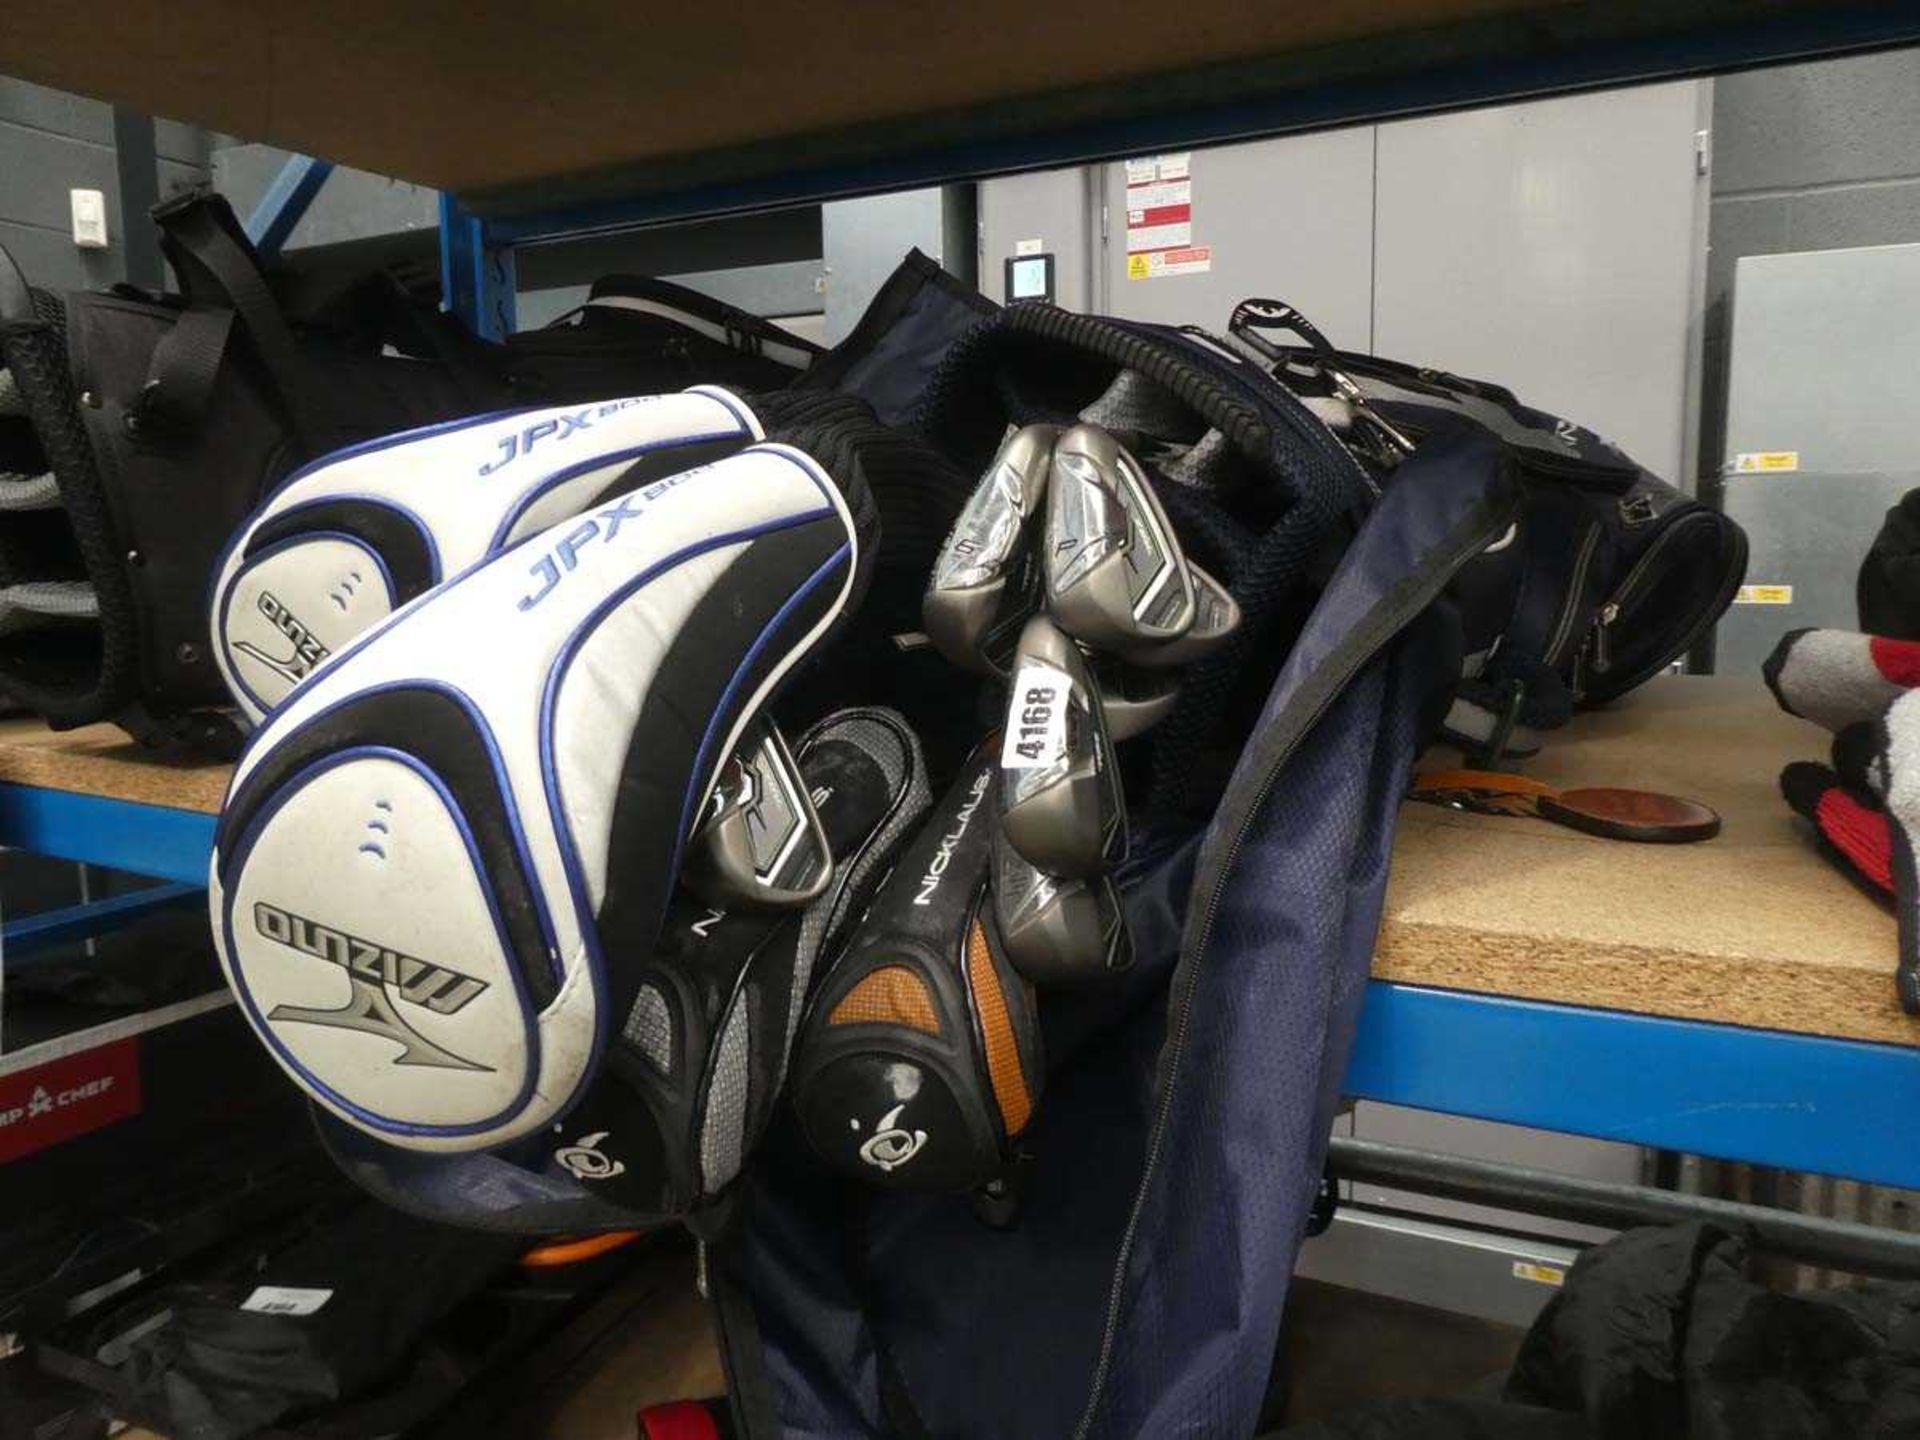 Blue golf bag containing a range of Mizuno, TaylorMade, RBZ and other clubs